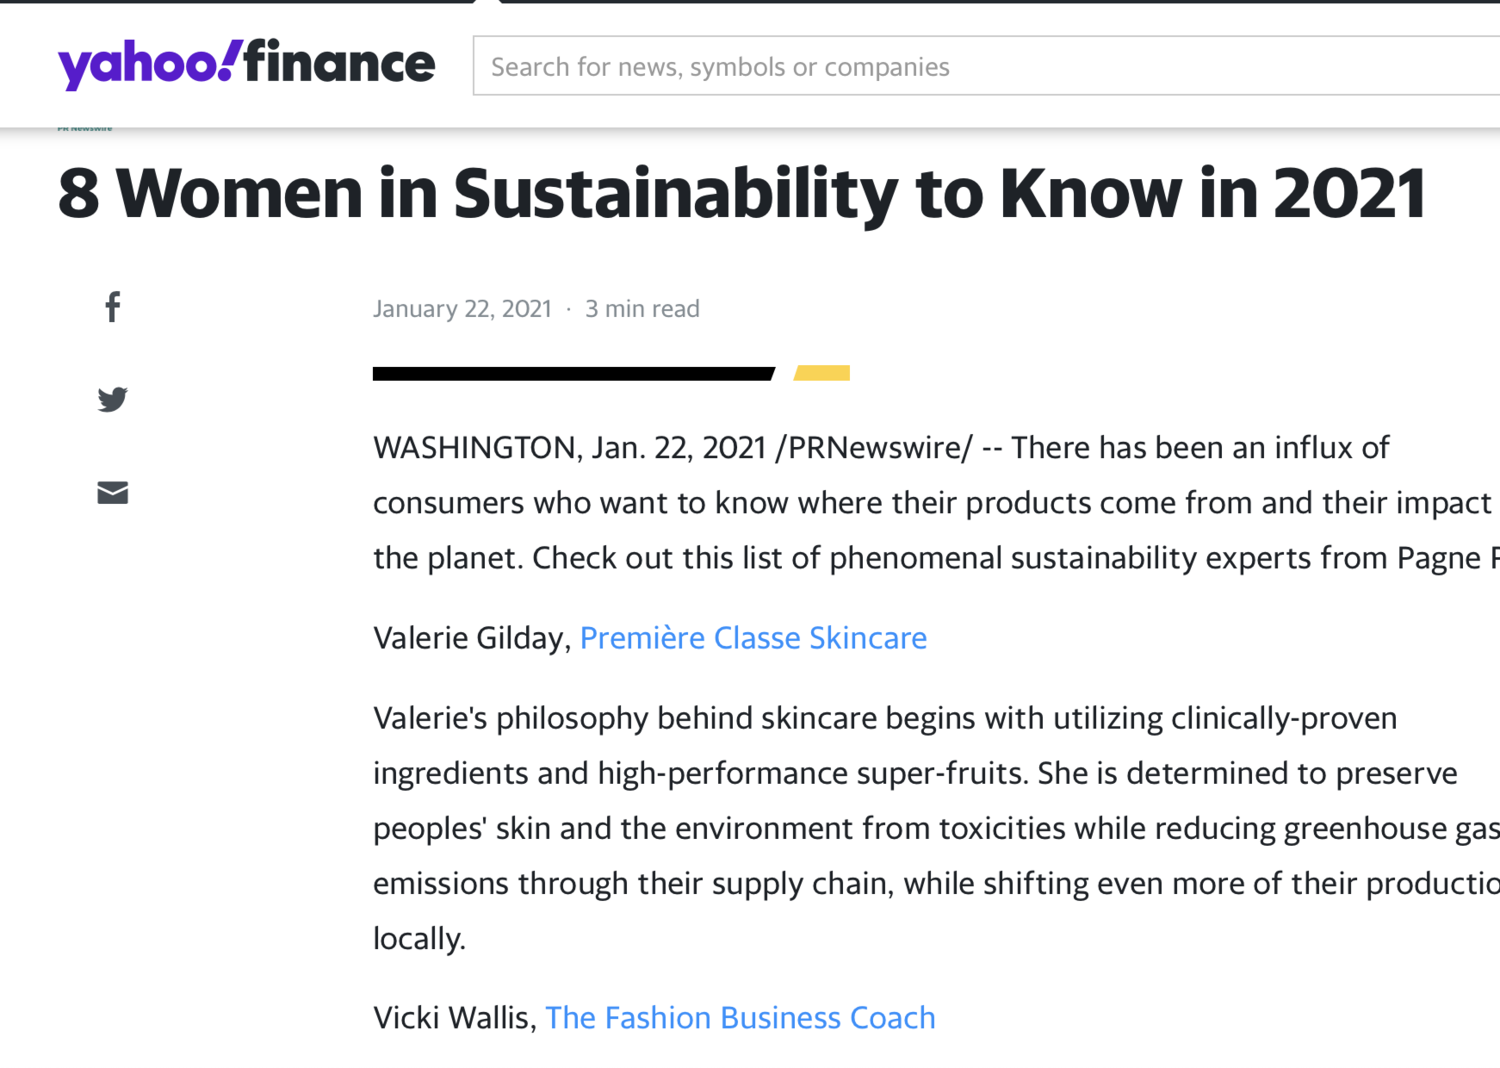  Vicki was named as one of Yahoo! Finance’s 8 Women in Sustainability to know 